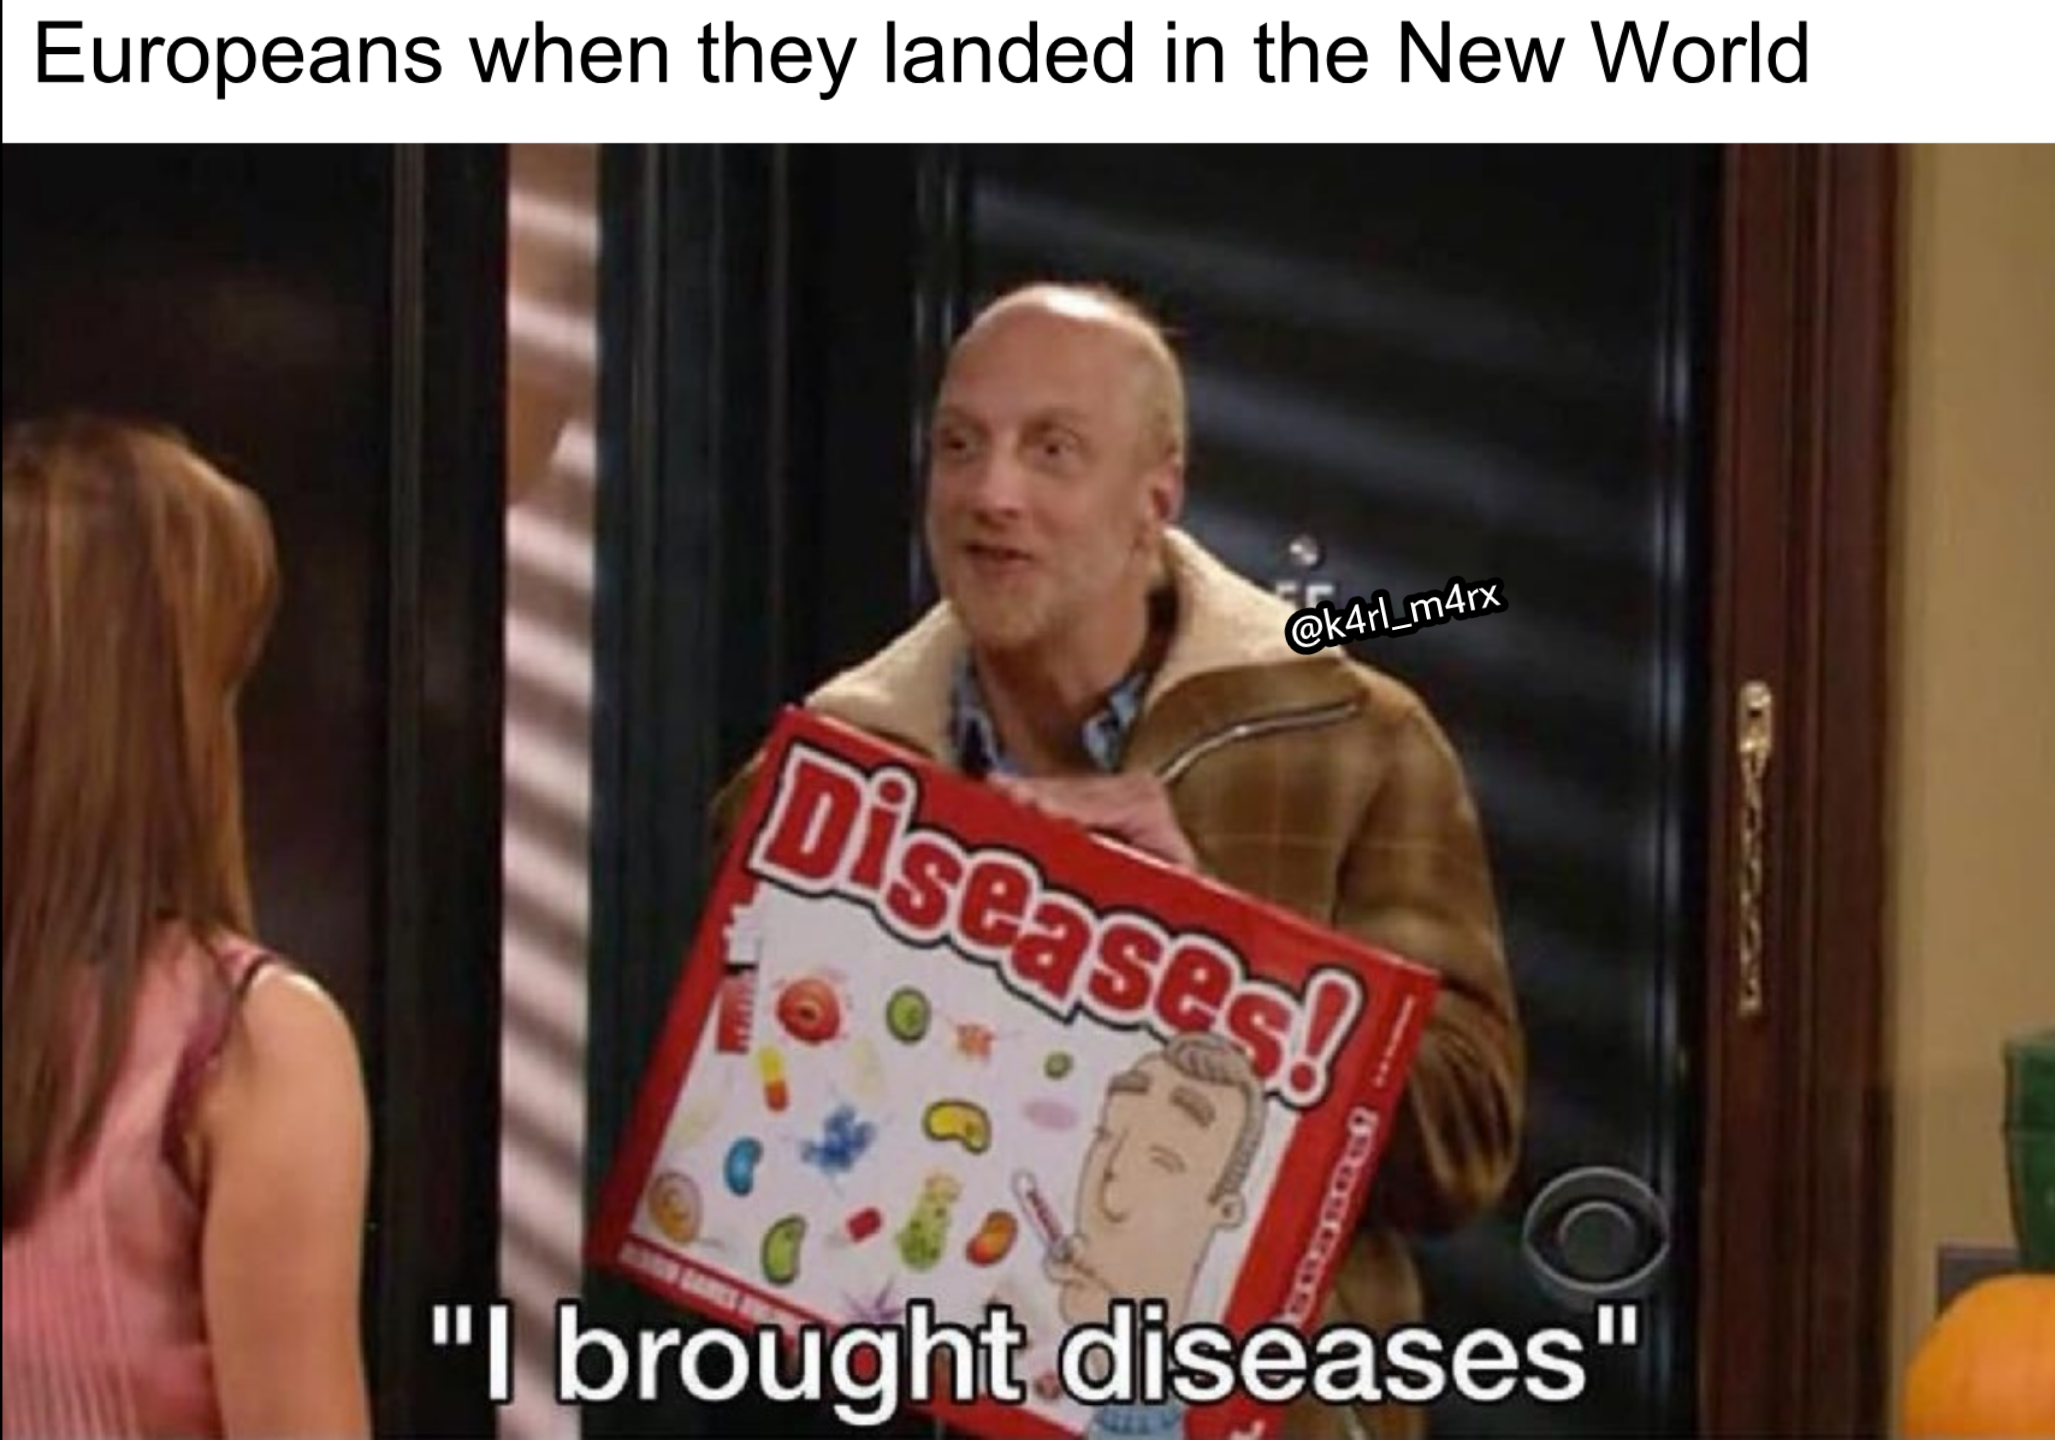 brought diseases - Europeans when they landed in the New World Diseases! "I brought diseases"